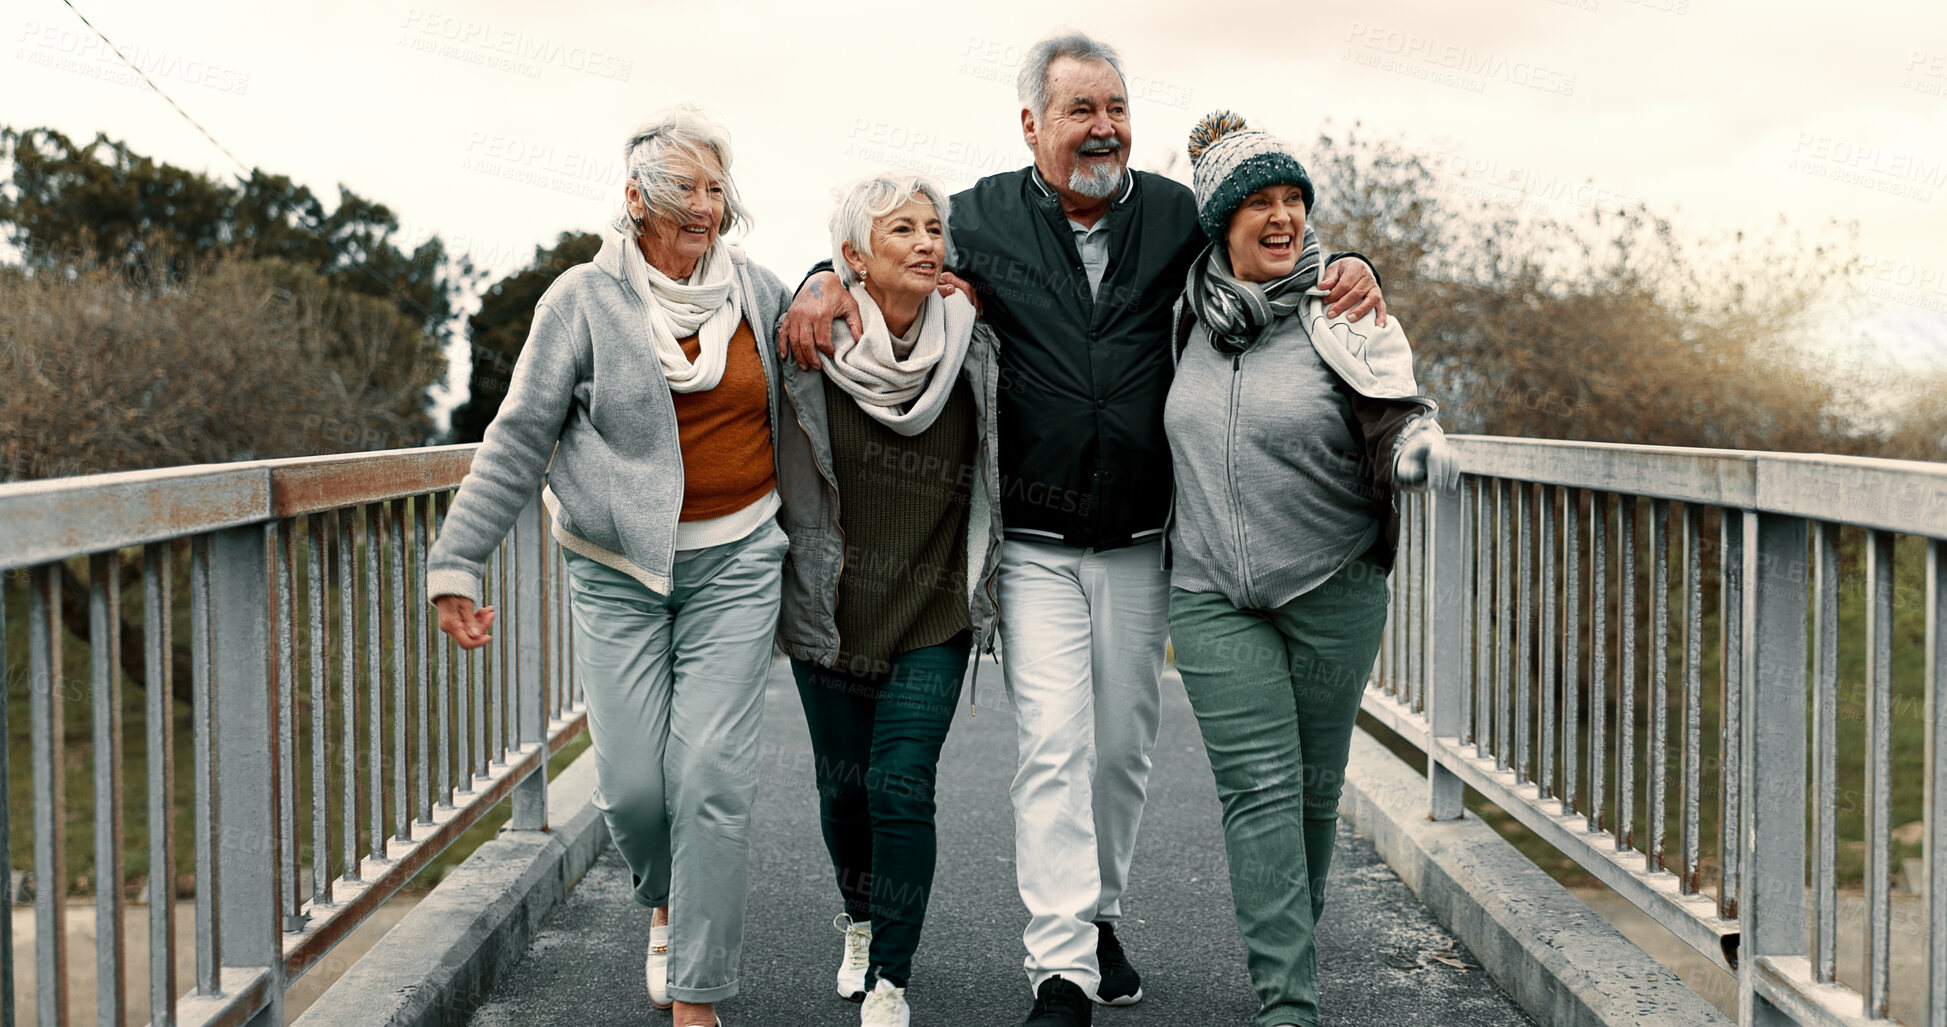 Buy stock photo Senior people, fitness group and bridge with laugh, care or  walk for training together, health or retirement. Elderly friends, hug and conversation with exercise, outdoor workout or pointing in park